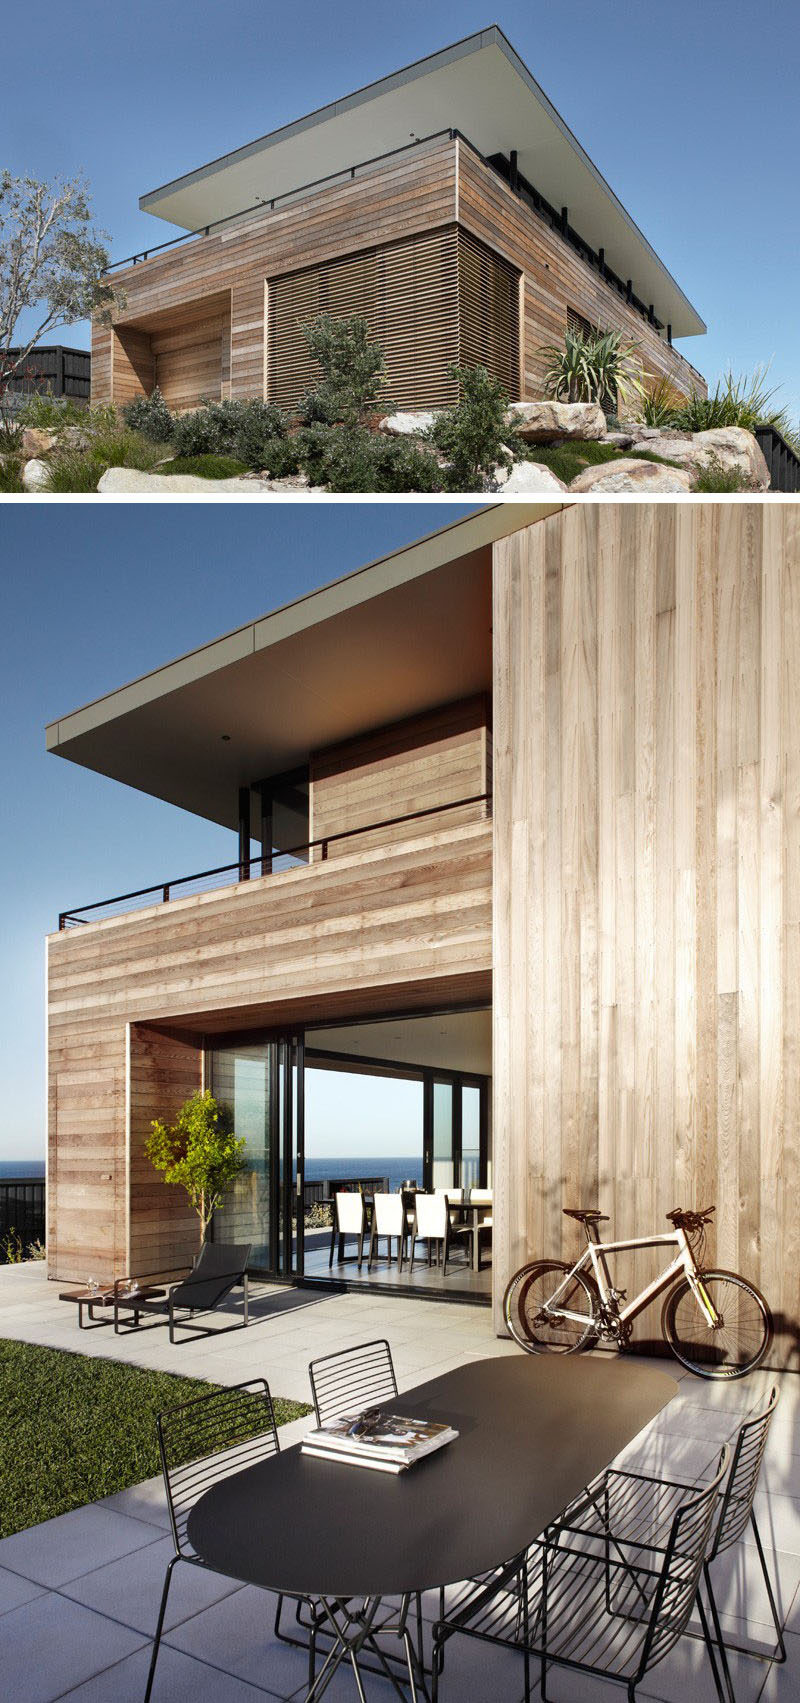 14 Examples Of Modern Beach Houses From Around The World ...